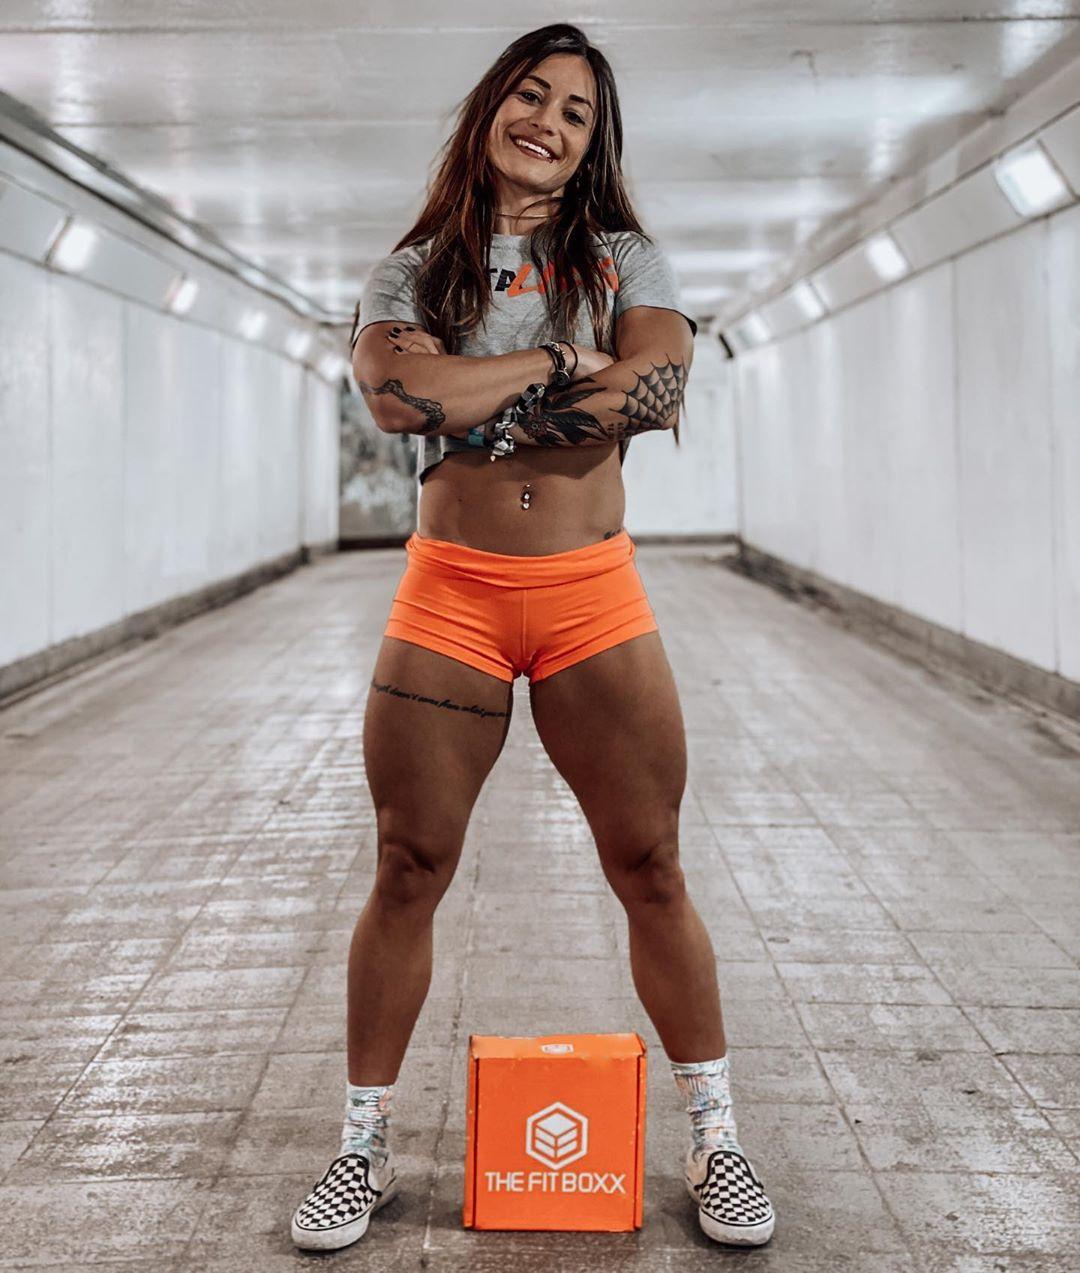 51 Hot Pictures Of Celia Gabbiani Which Make Certain To Grab Your Eye 602